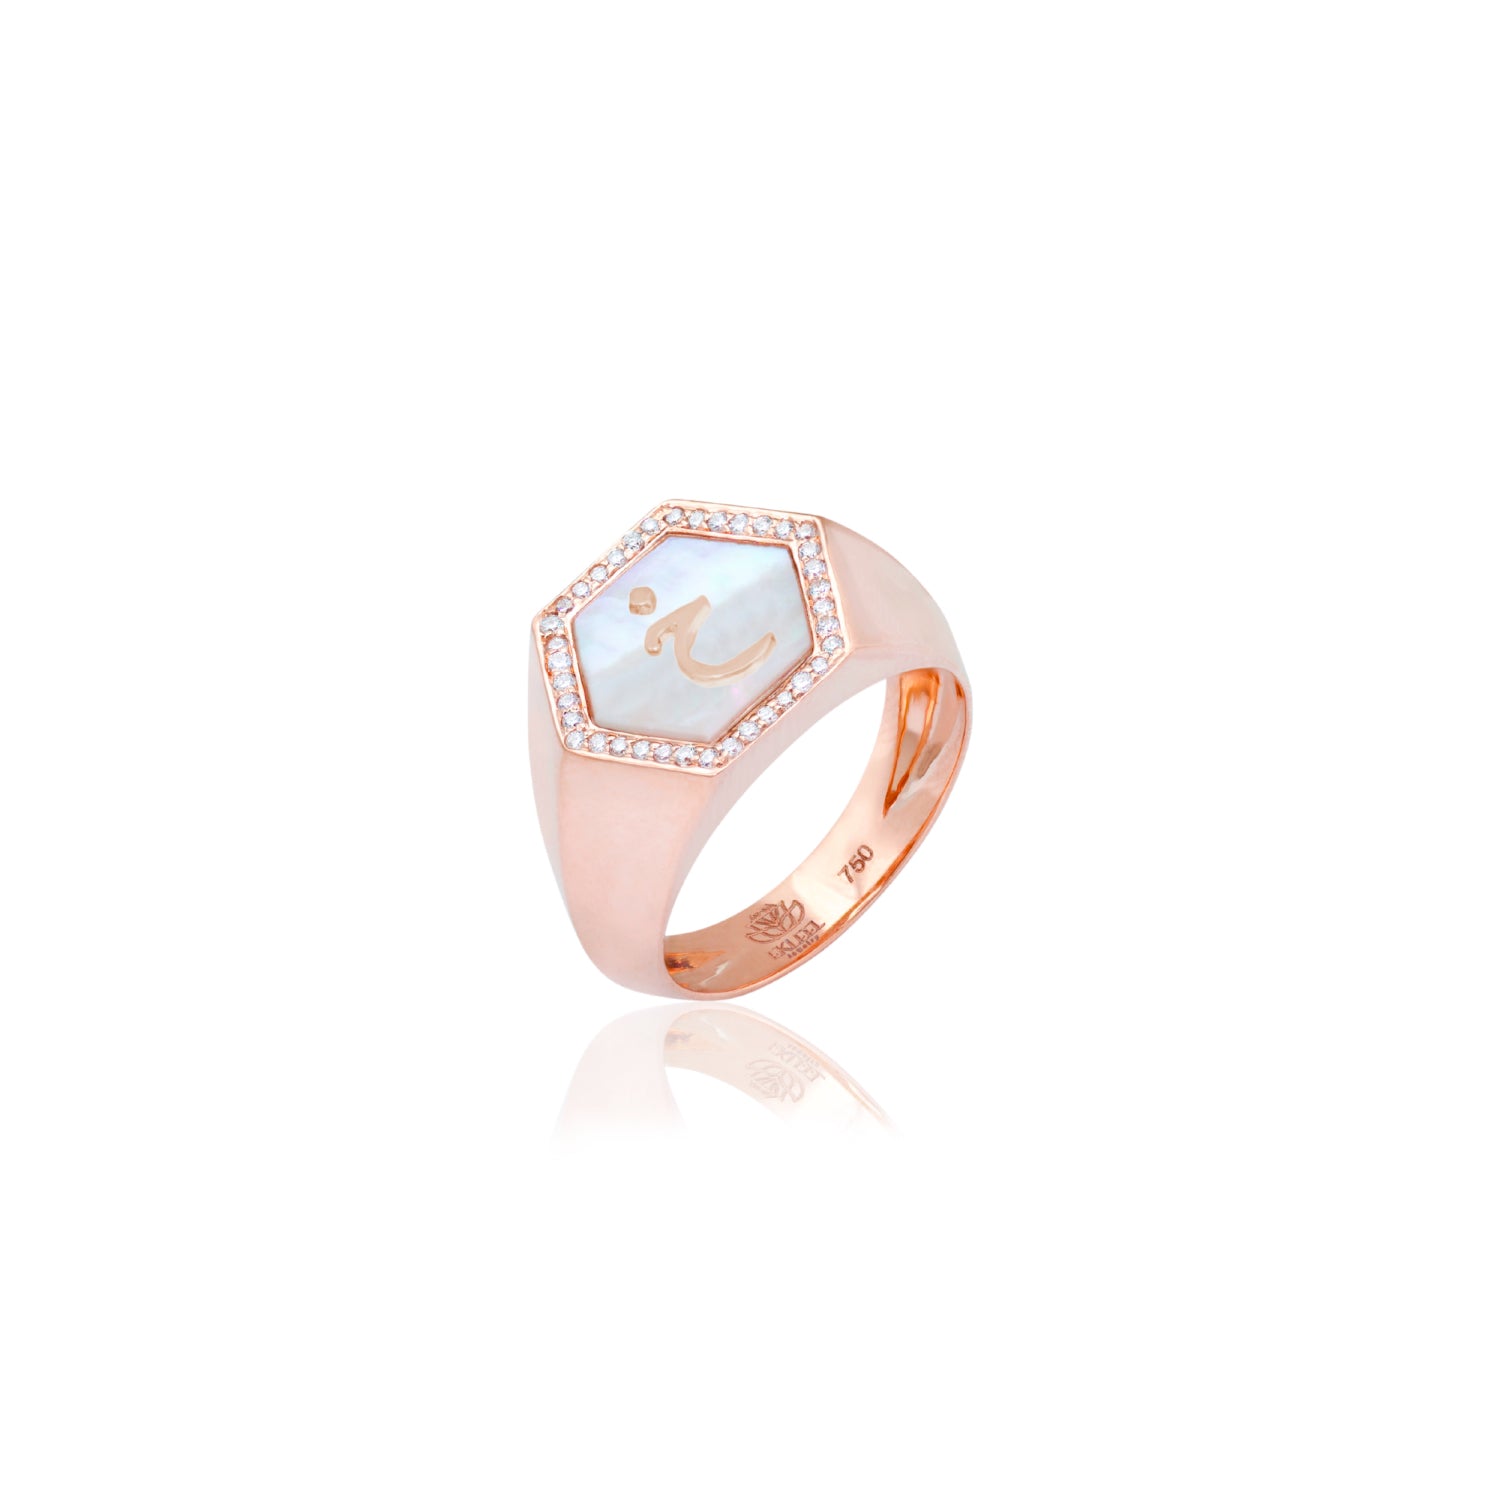 Qamoos 2.0 Letter خ White Mother of Pearl and Diamond Signet Ring in Rose Gold